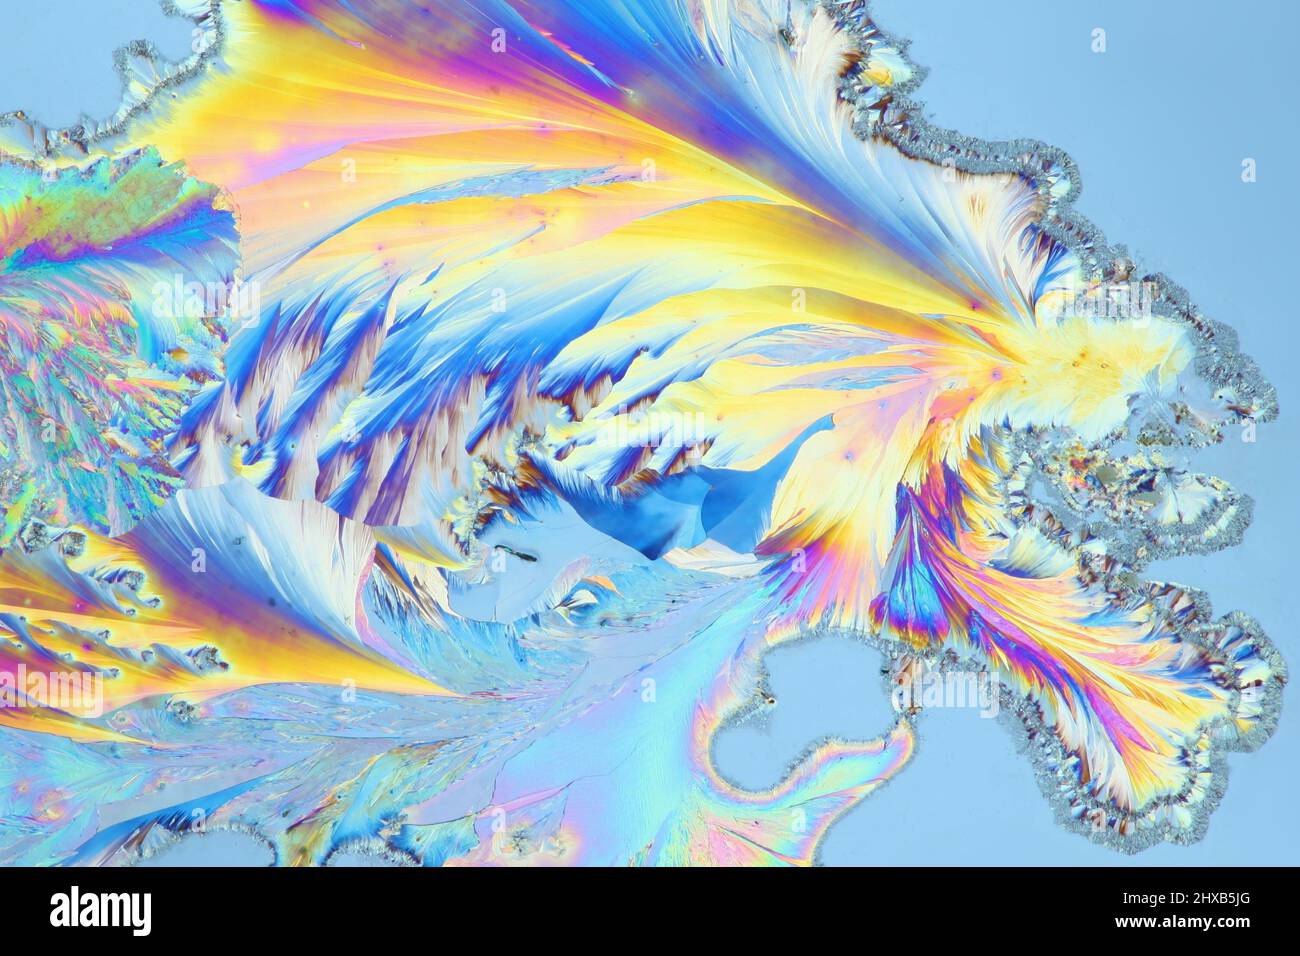 Crystals of a common painkiller Paracetamol. Microscope image, photographed in  polarized light. Stock Photo